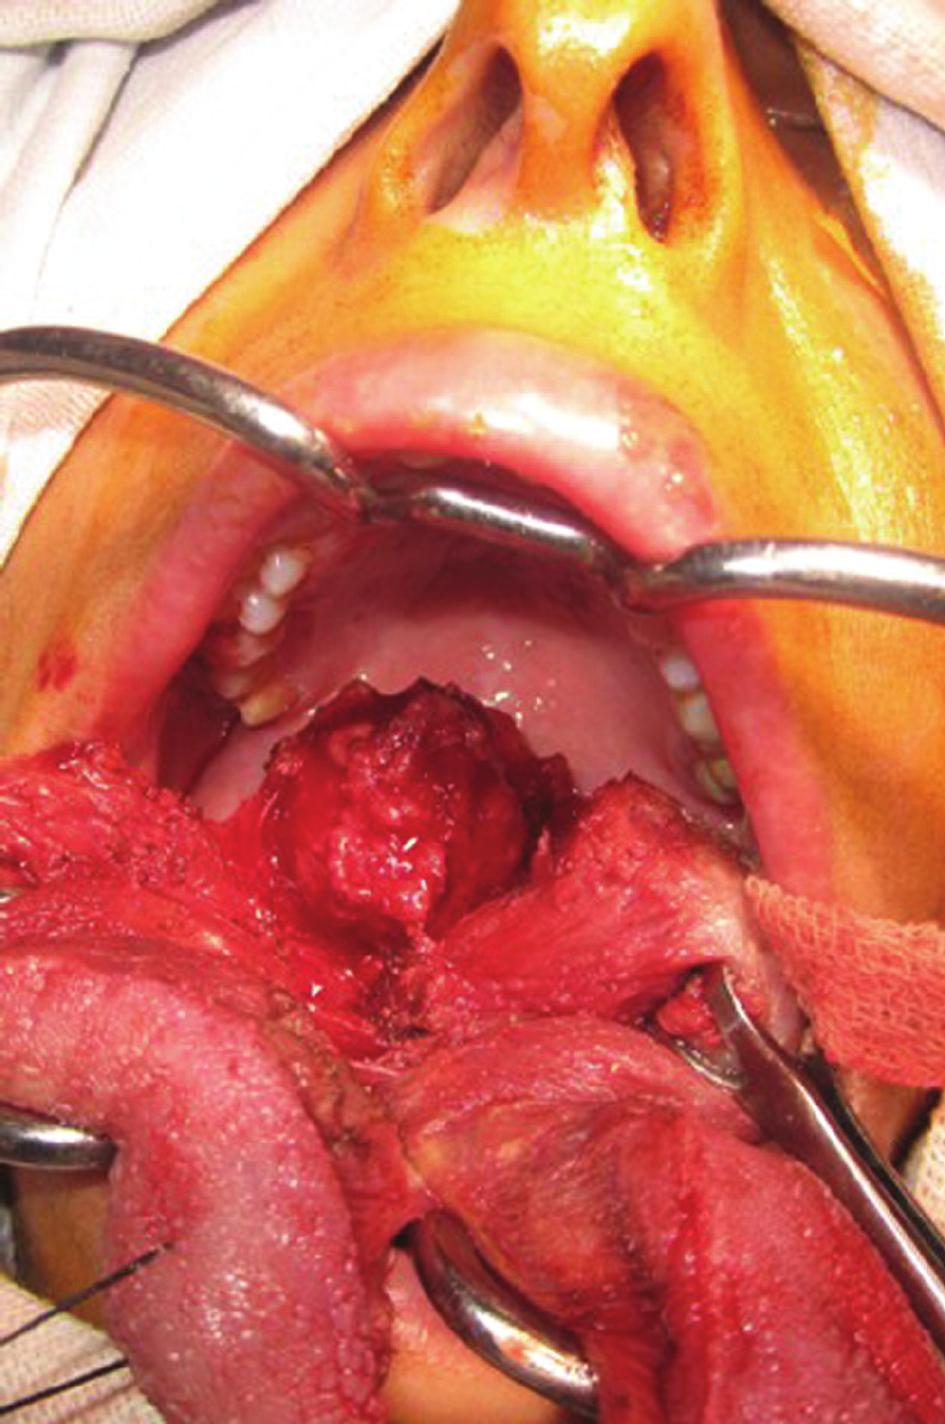 The thyroid gland was normally located in the anterior neck (Figure 1).